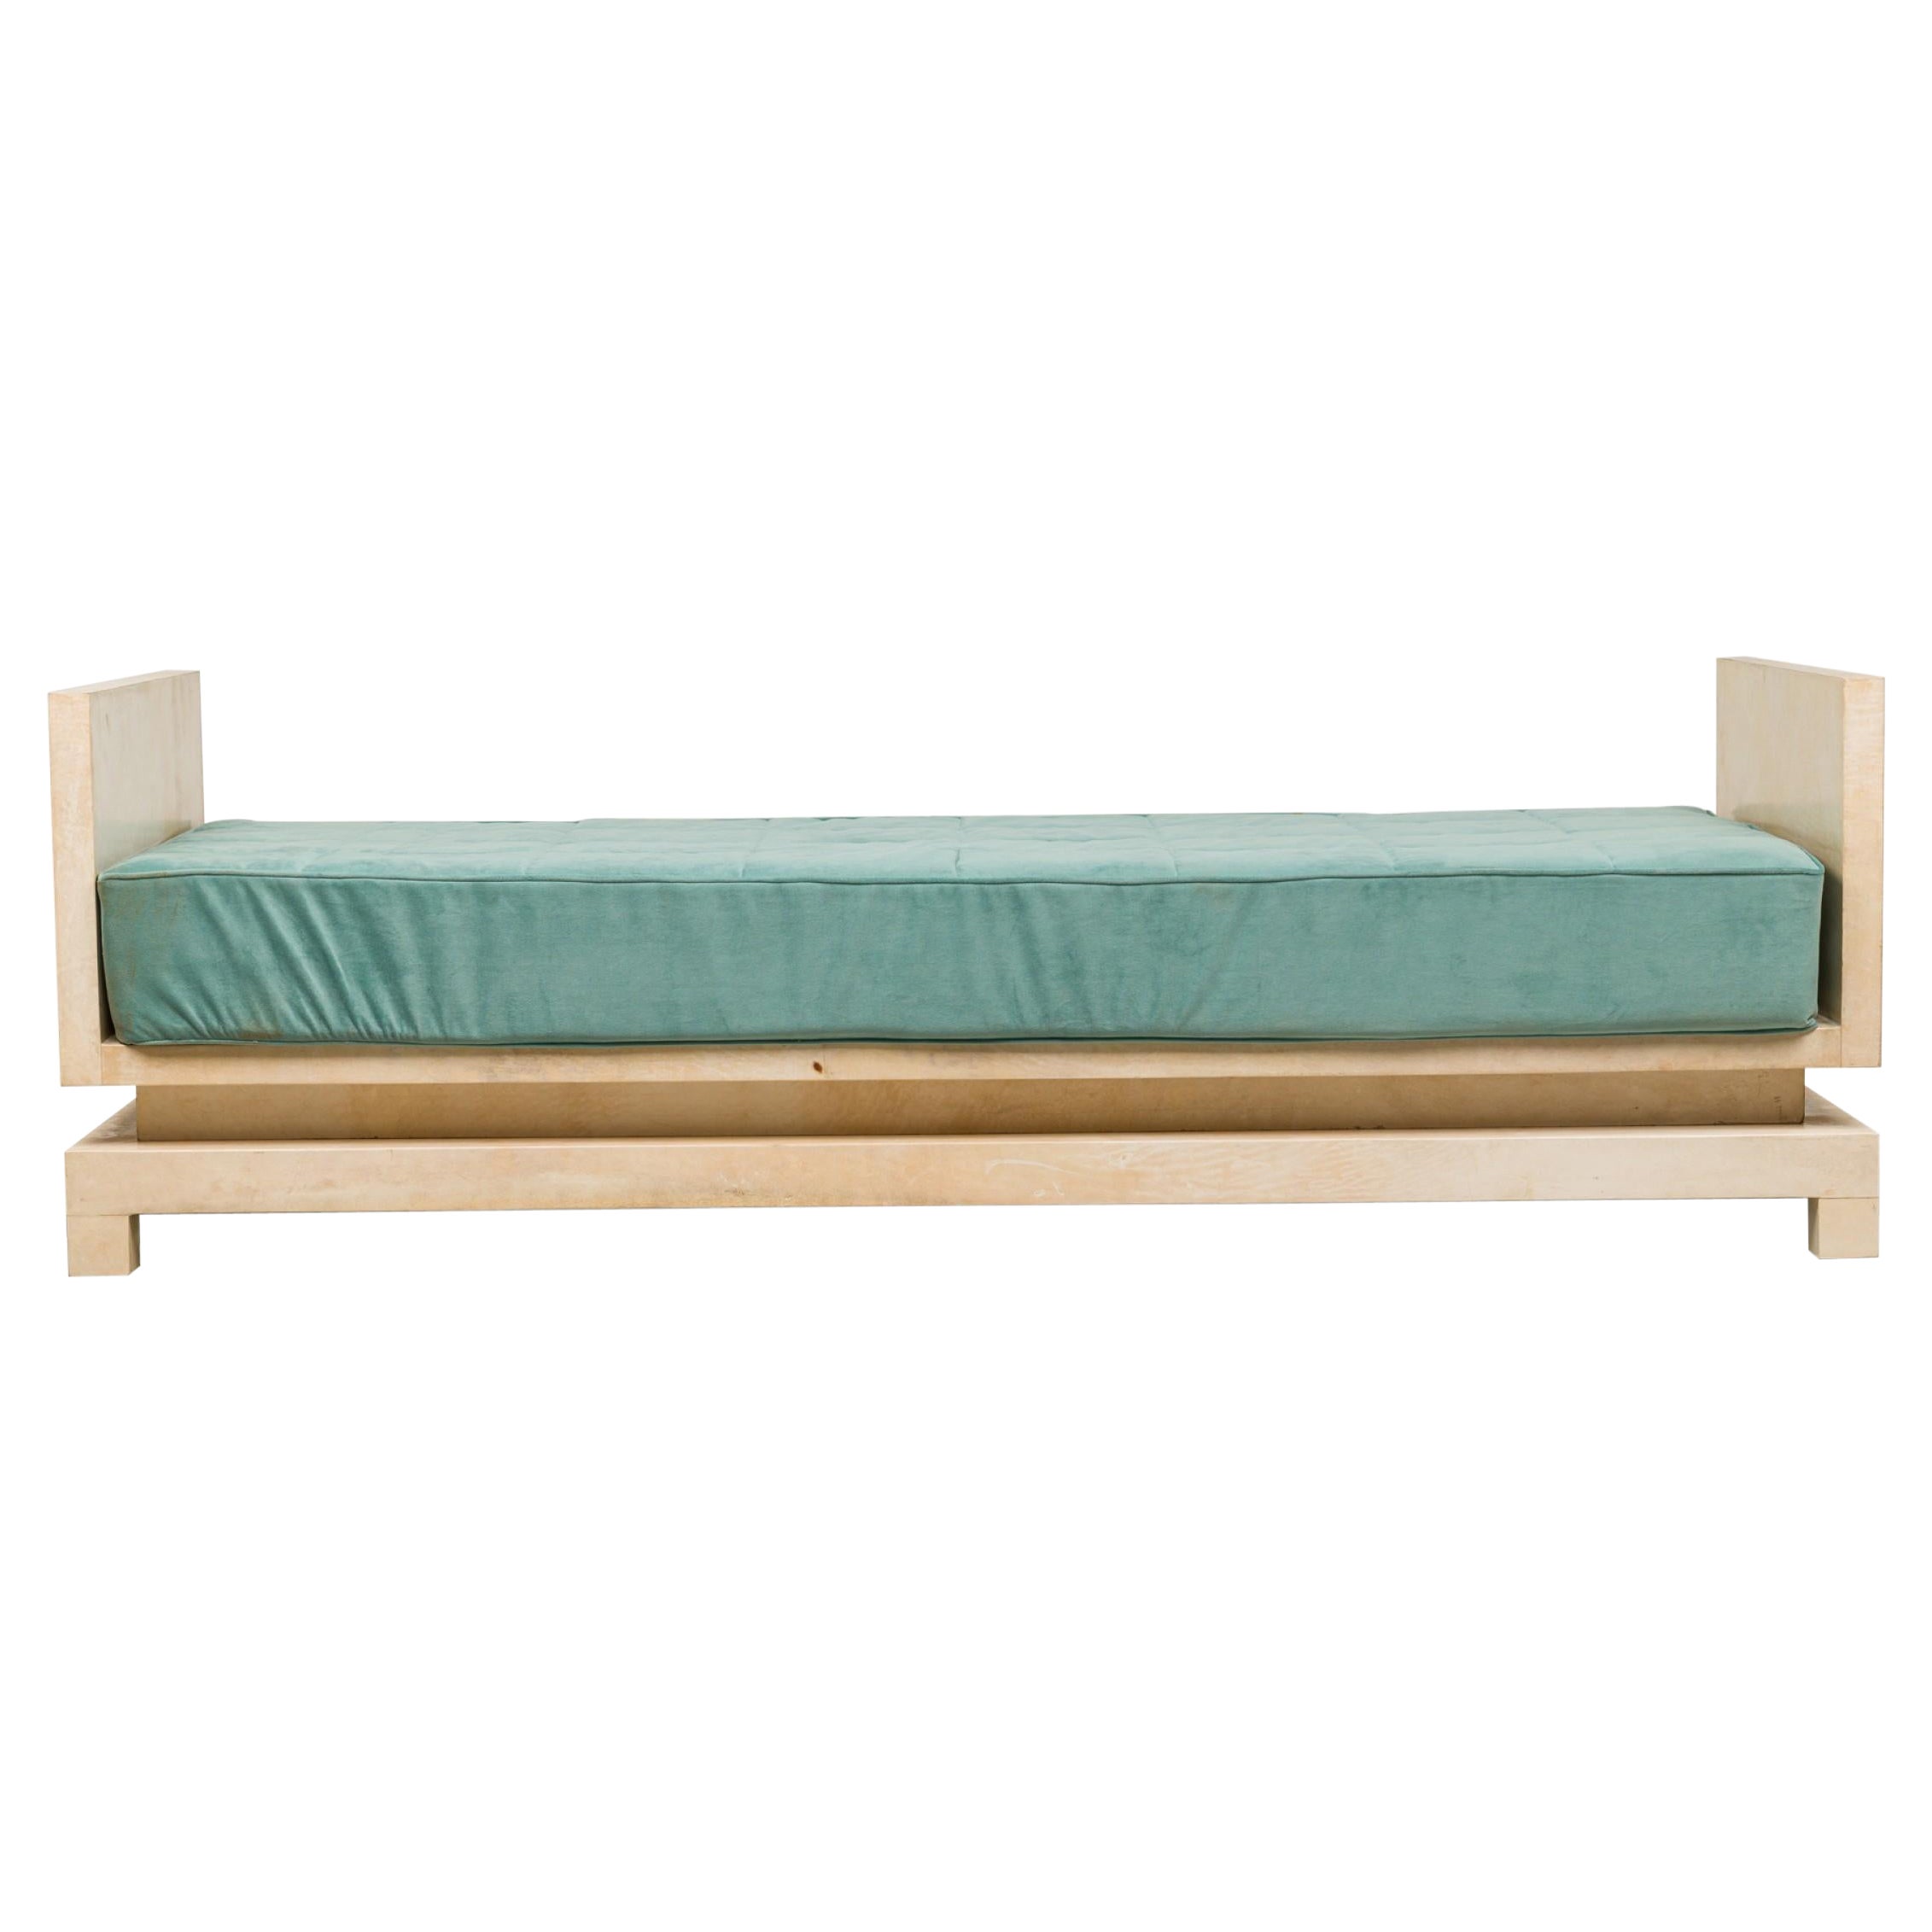 Mid-Century American Parchment and Teal Upholstered Daybed Manner of Samuel Marx For Sale